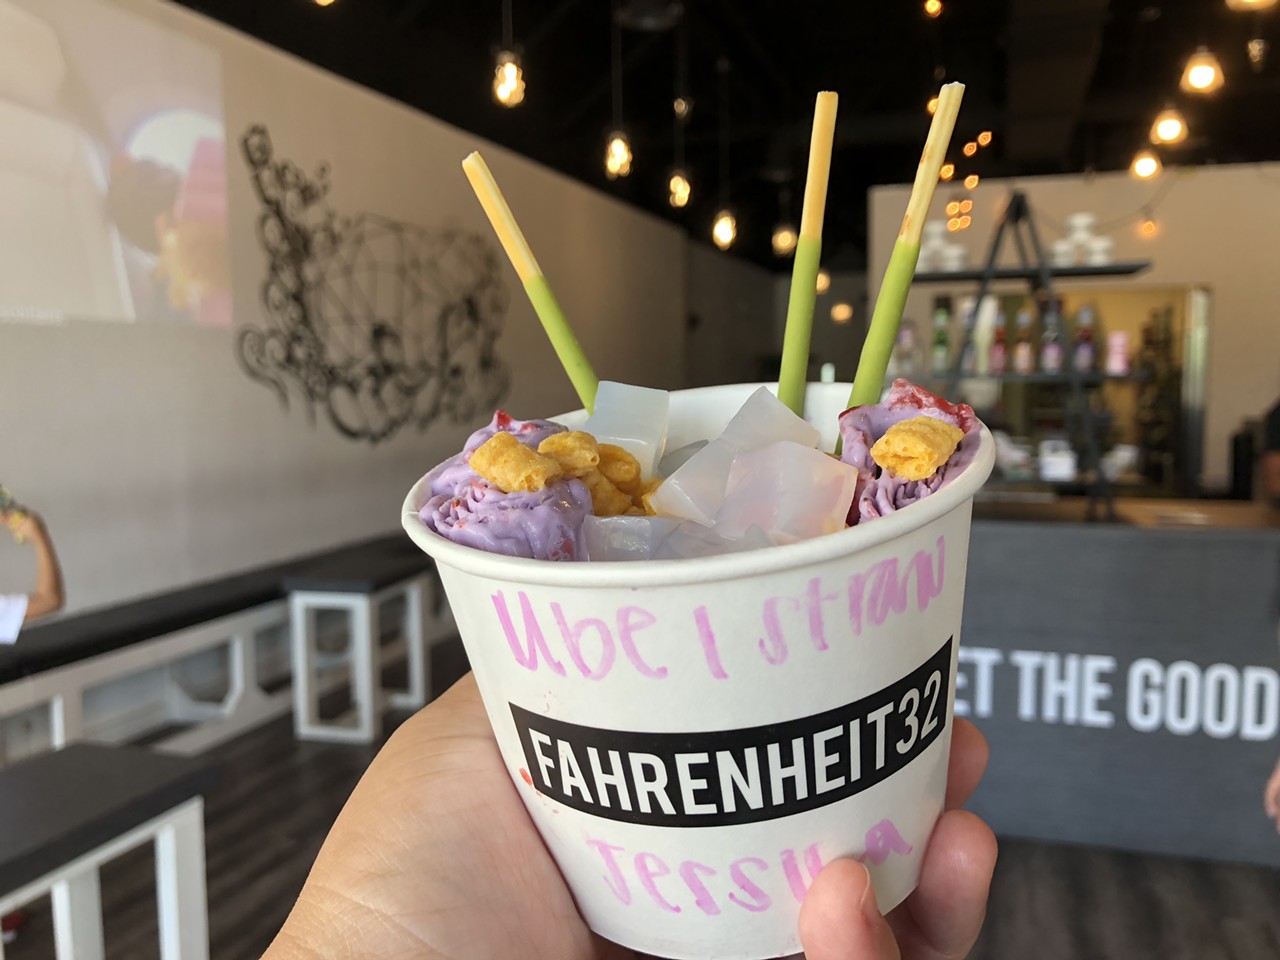 Farenheight 32
226 W. Bitters Road, Suite 119,  (210) 627-6232, facebook.com/fahrenheit32
Rolled ice cream rolled through San Antonio in 2017 and it's here to stay. El Paso-based Fahrenheit 32 at Embassy opened its third location in Texas. Flavors include everything “Purple Haze” with taro ice cream or “Black Magic” with black sesame ice cream with unlimited toppings.  
Photo by Jess Elizarraras